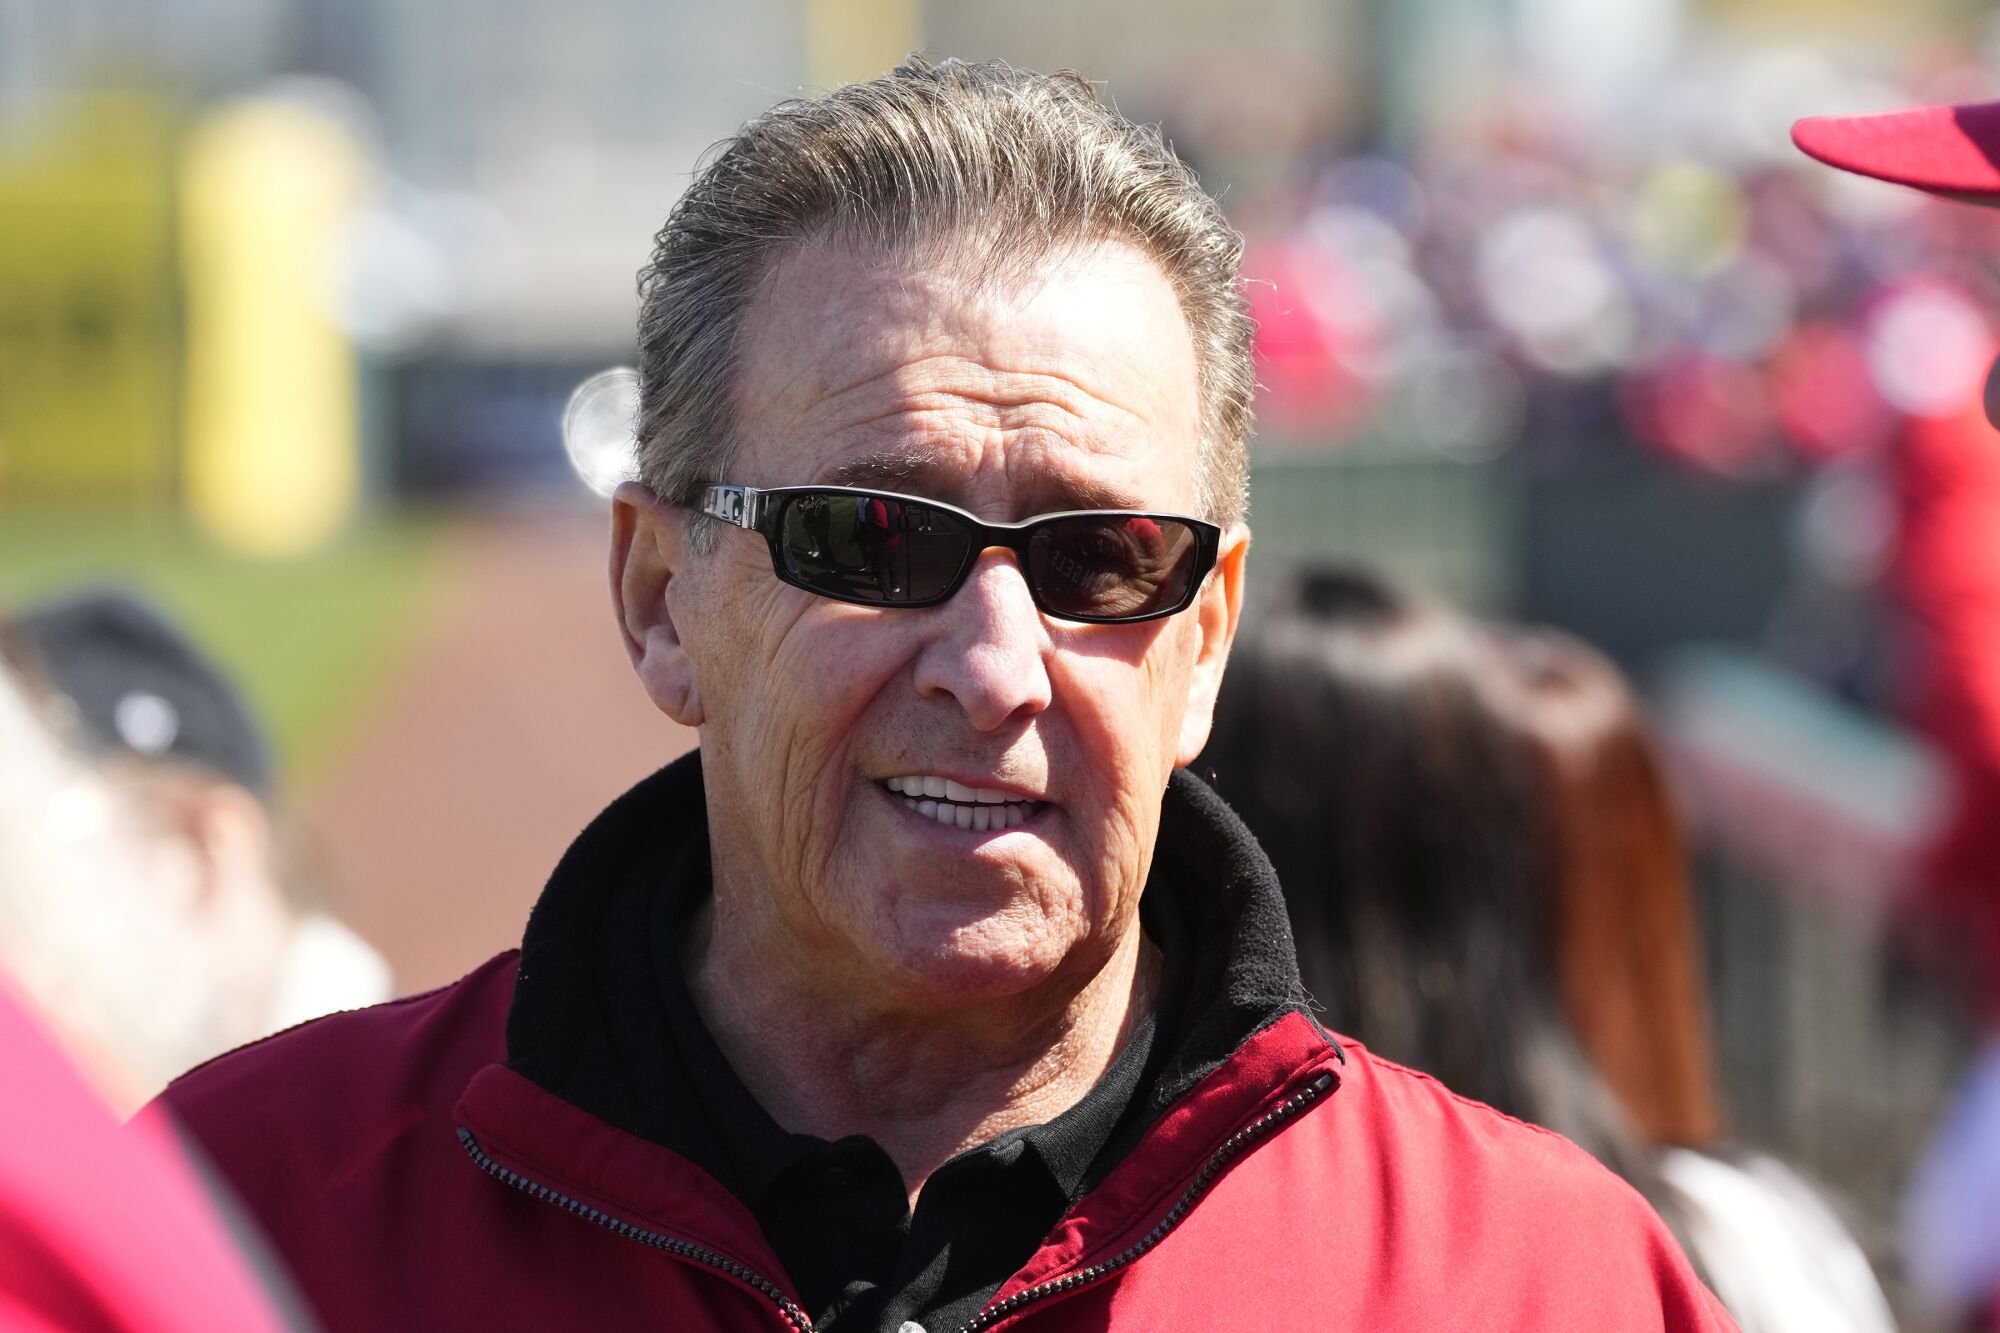 Angels owner Arte Moreno wearing sunglasses and a red zip up jacket.